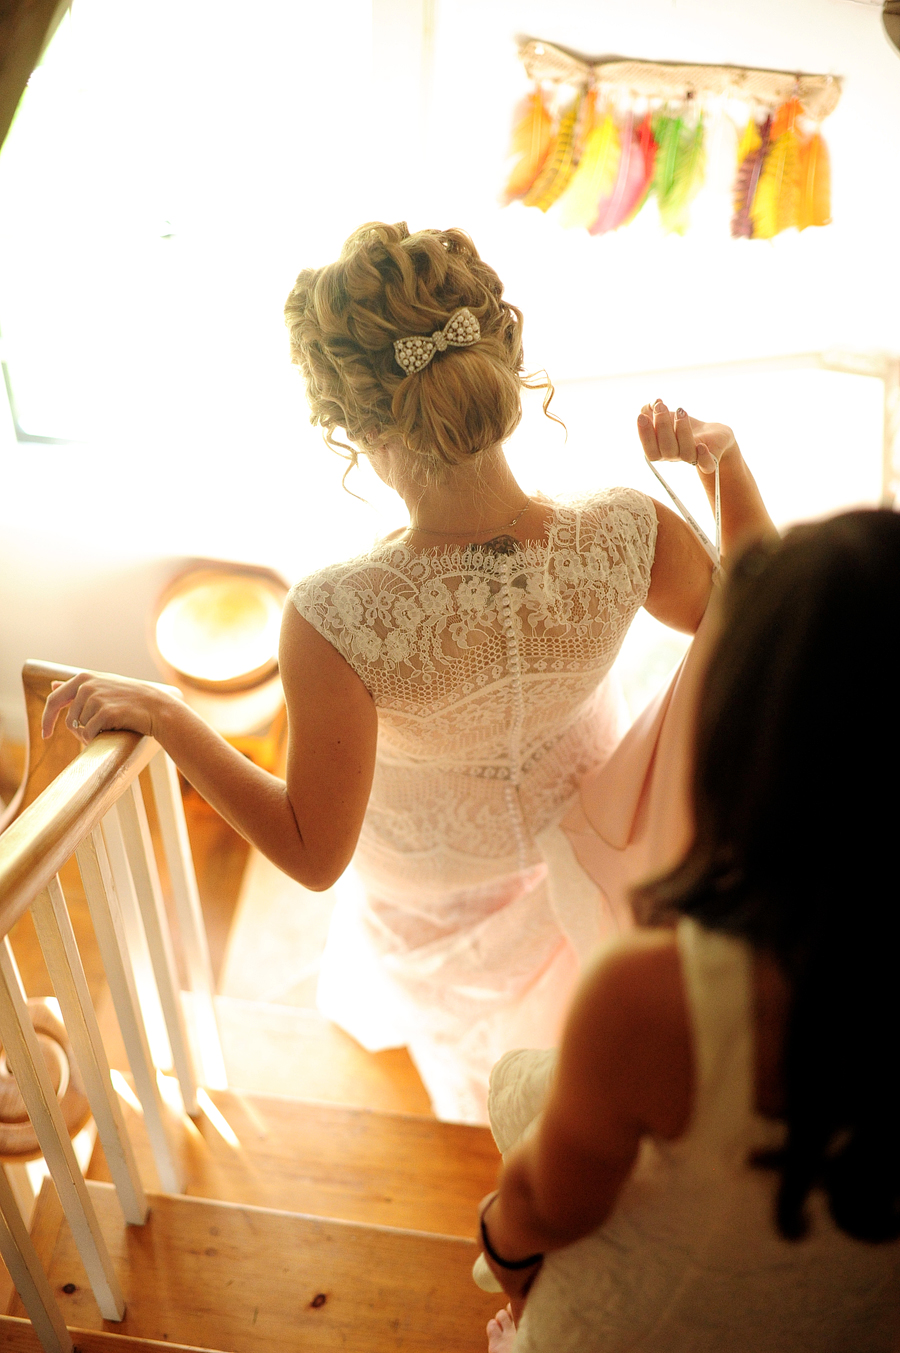 bride walking down the stairs